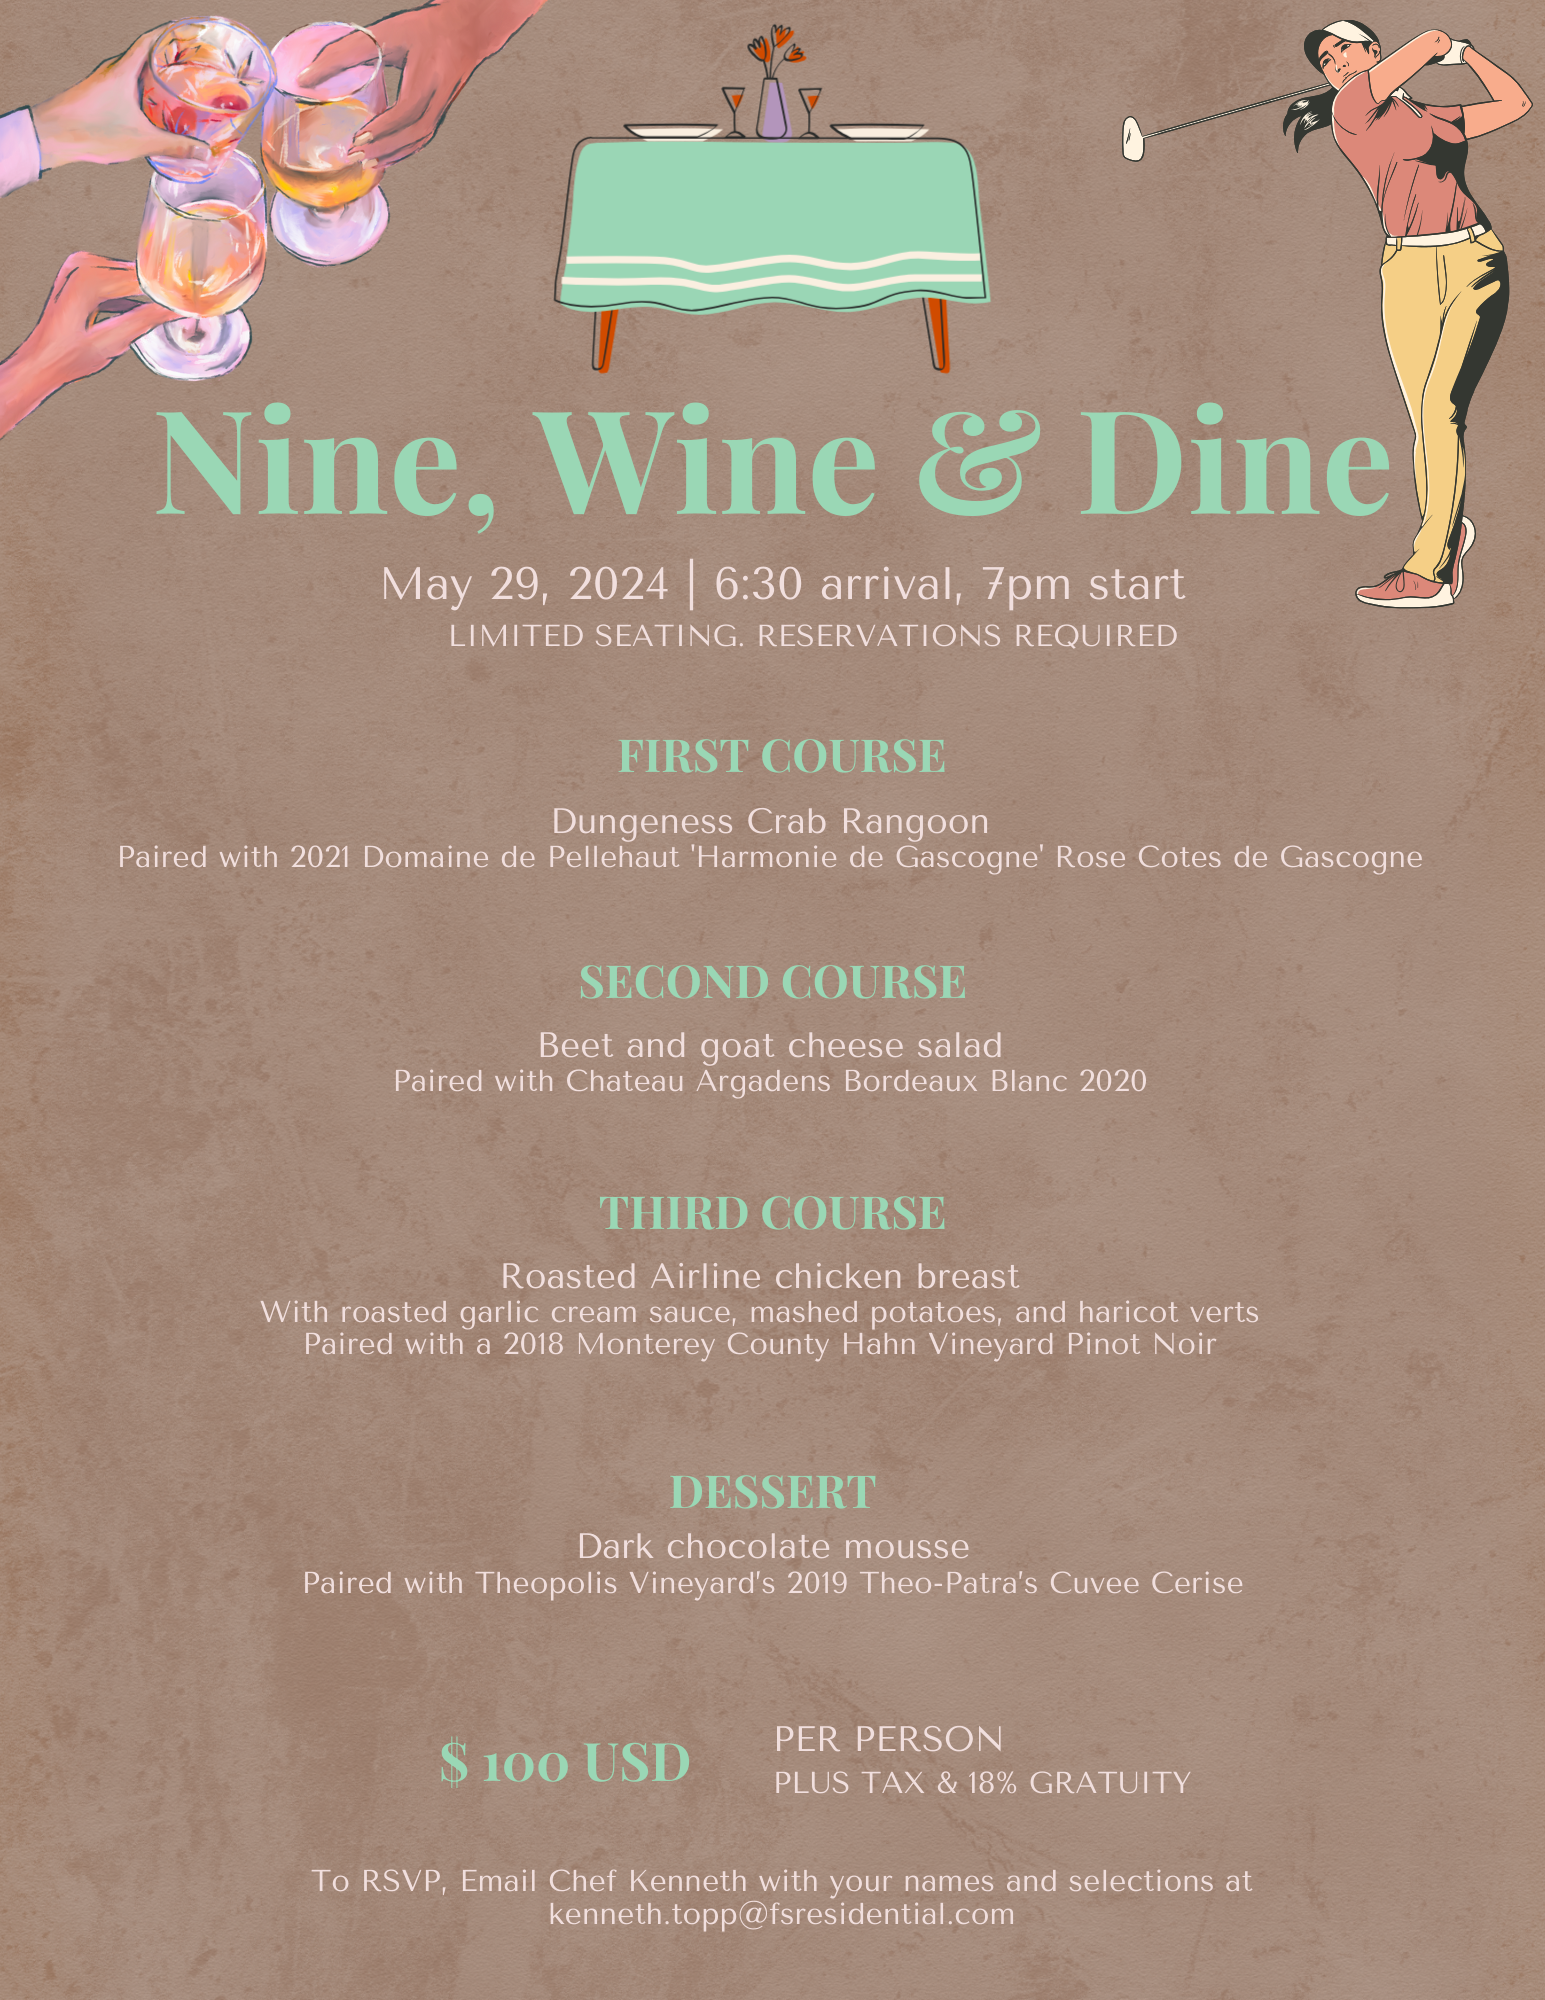 Nine, Wine & Dine Four Course Meal Event! May 29! (RSVP ONLY)